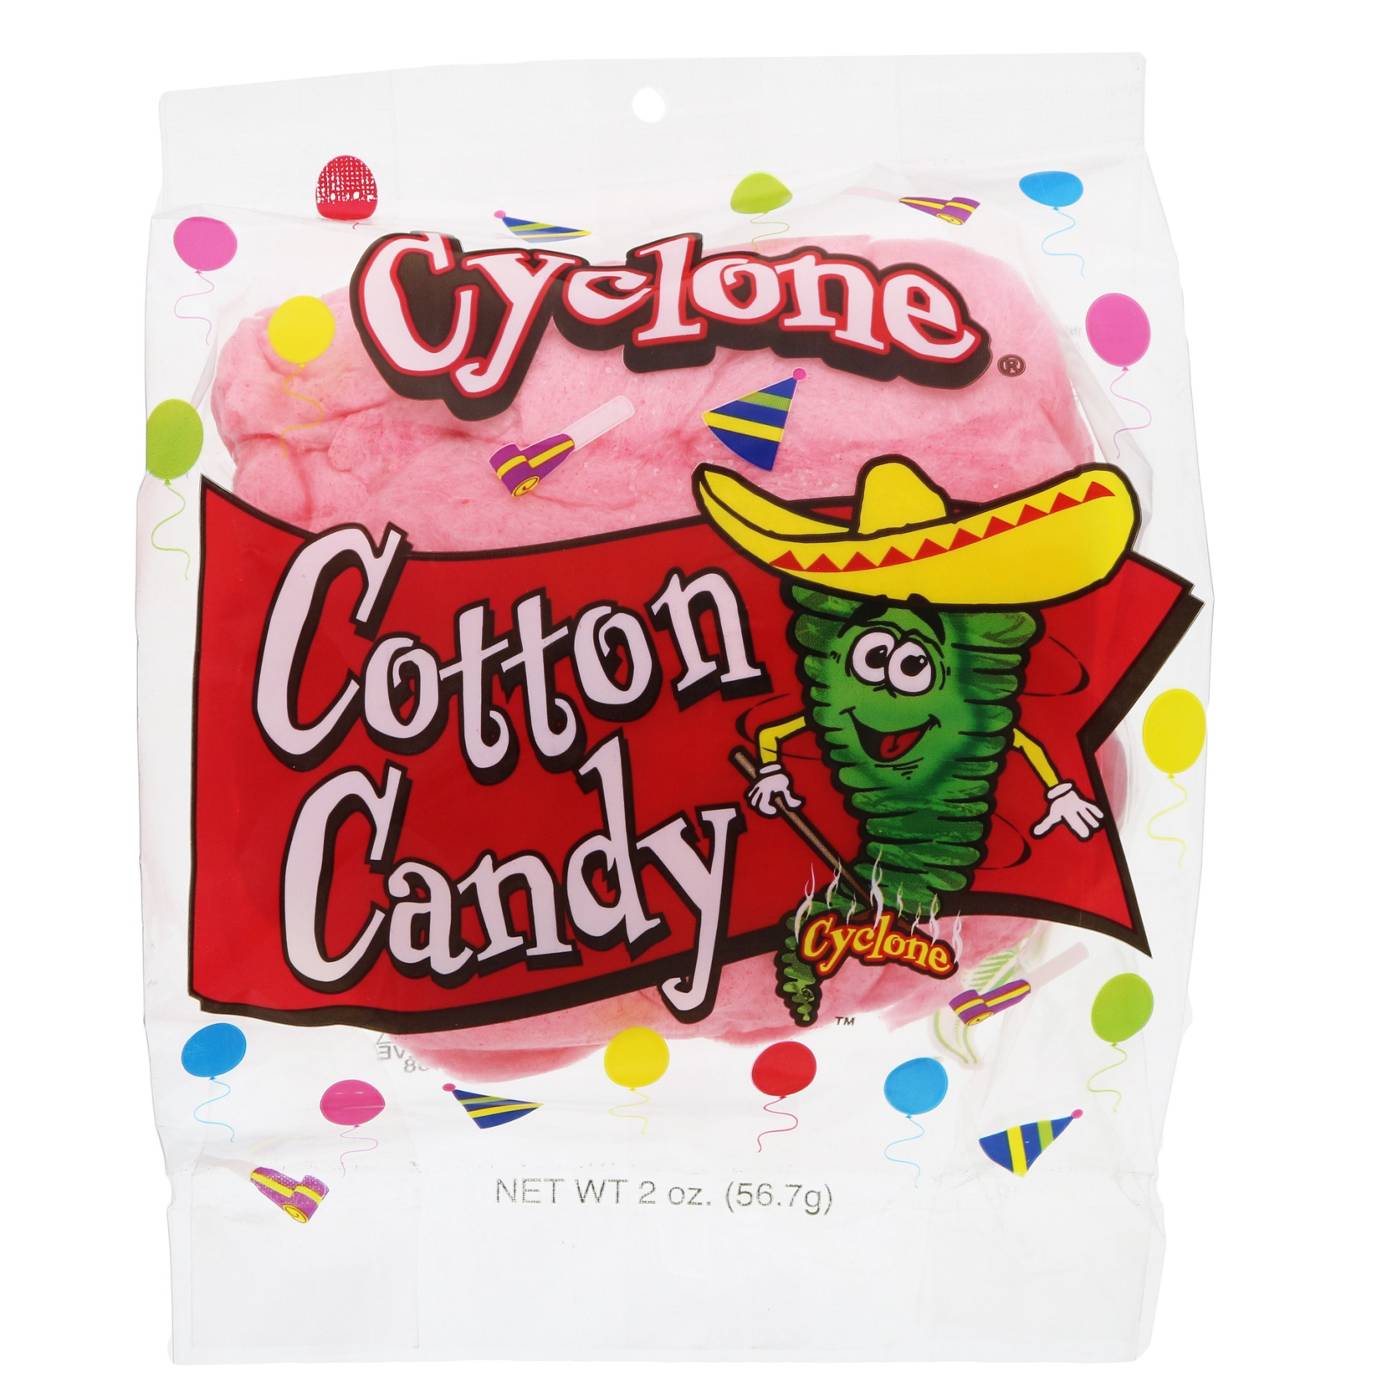 Cyclone Cotton Candy; image 2 of 3